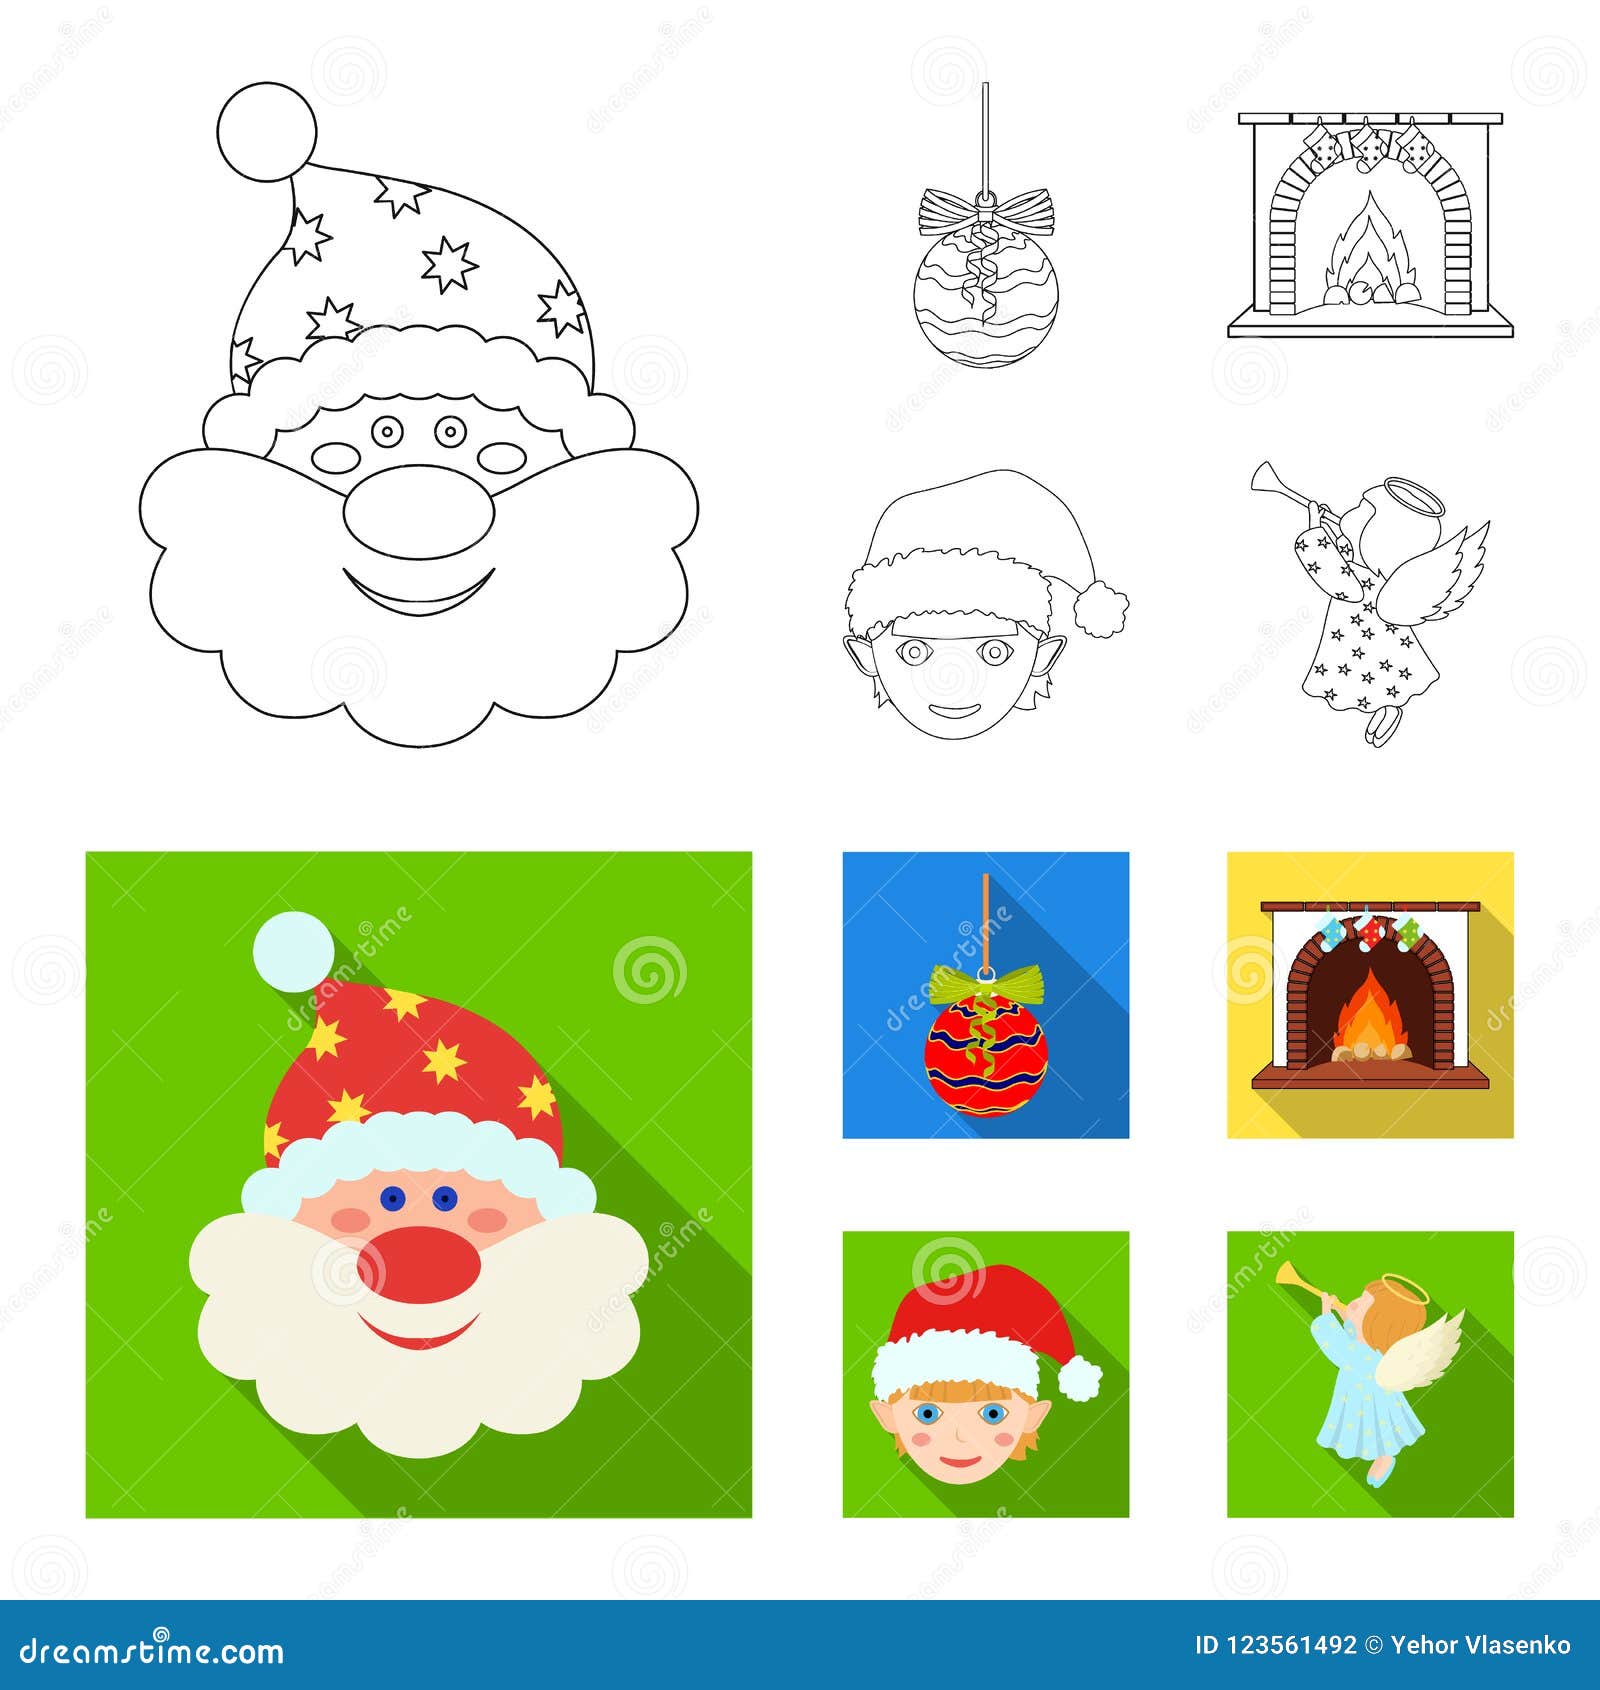 Download Santa Claus Dwarf Fireplace And Decoration Outline flat Icons In Set Collection